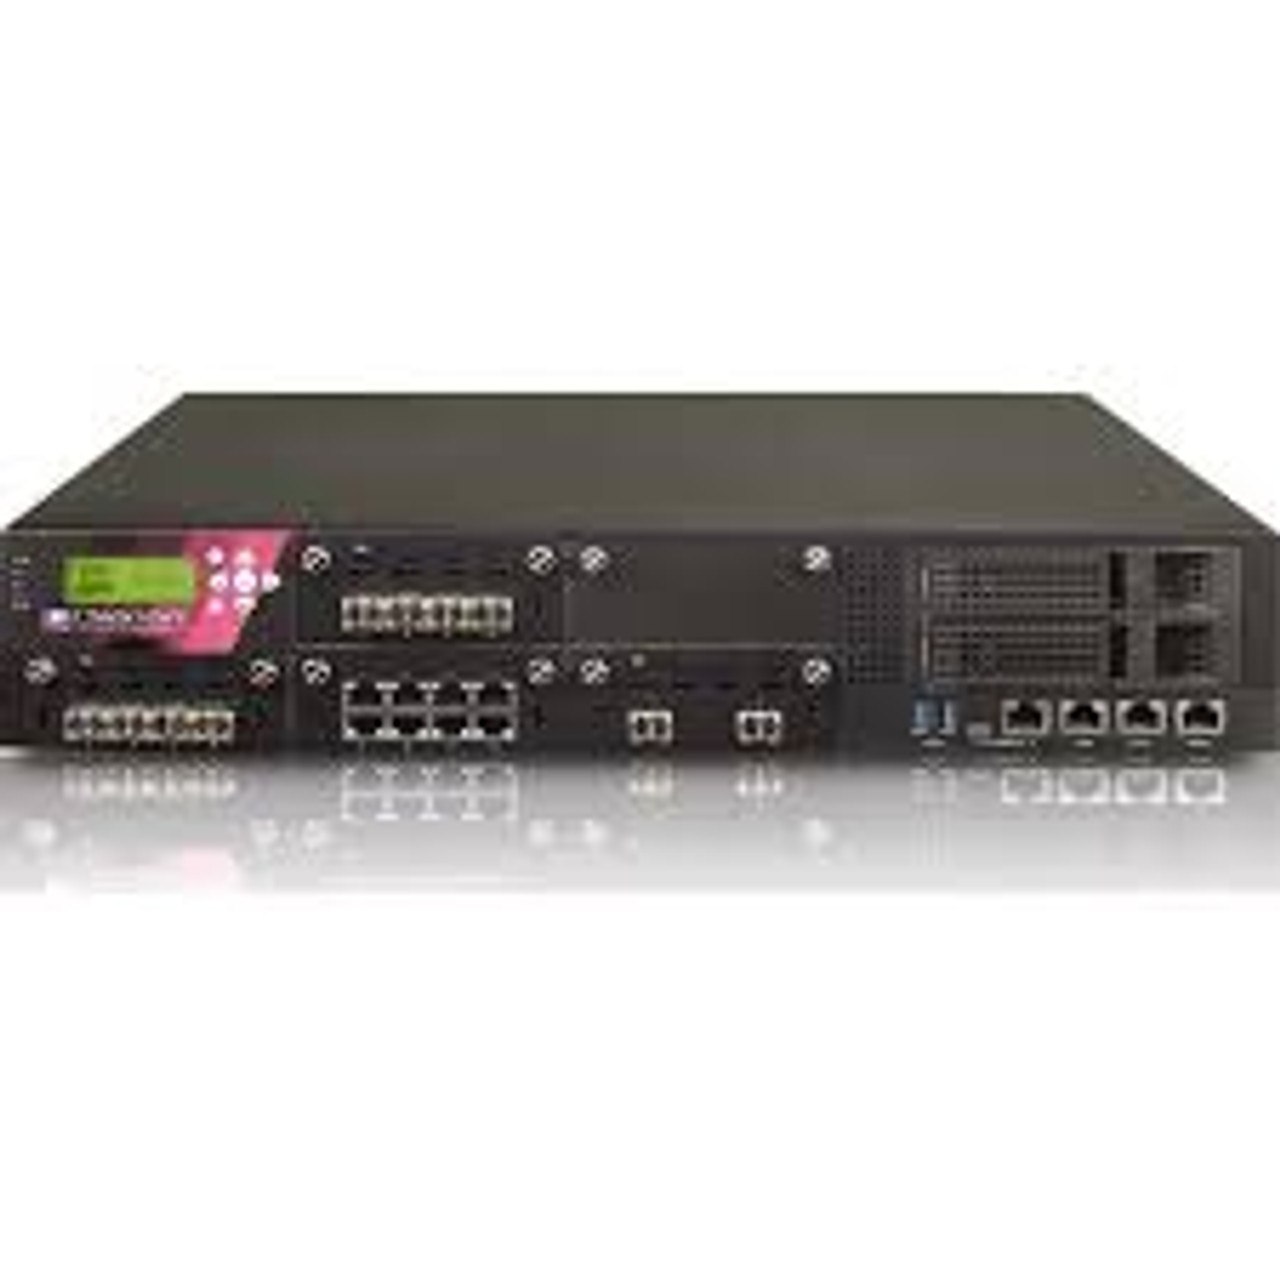 23800 Next Generation Threat Prevention & SandBlast (NGTX) Appliance - High Performance Package (HPP) with SSD